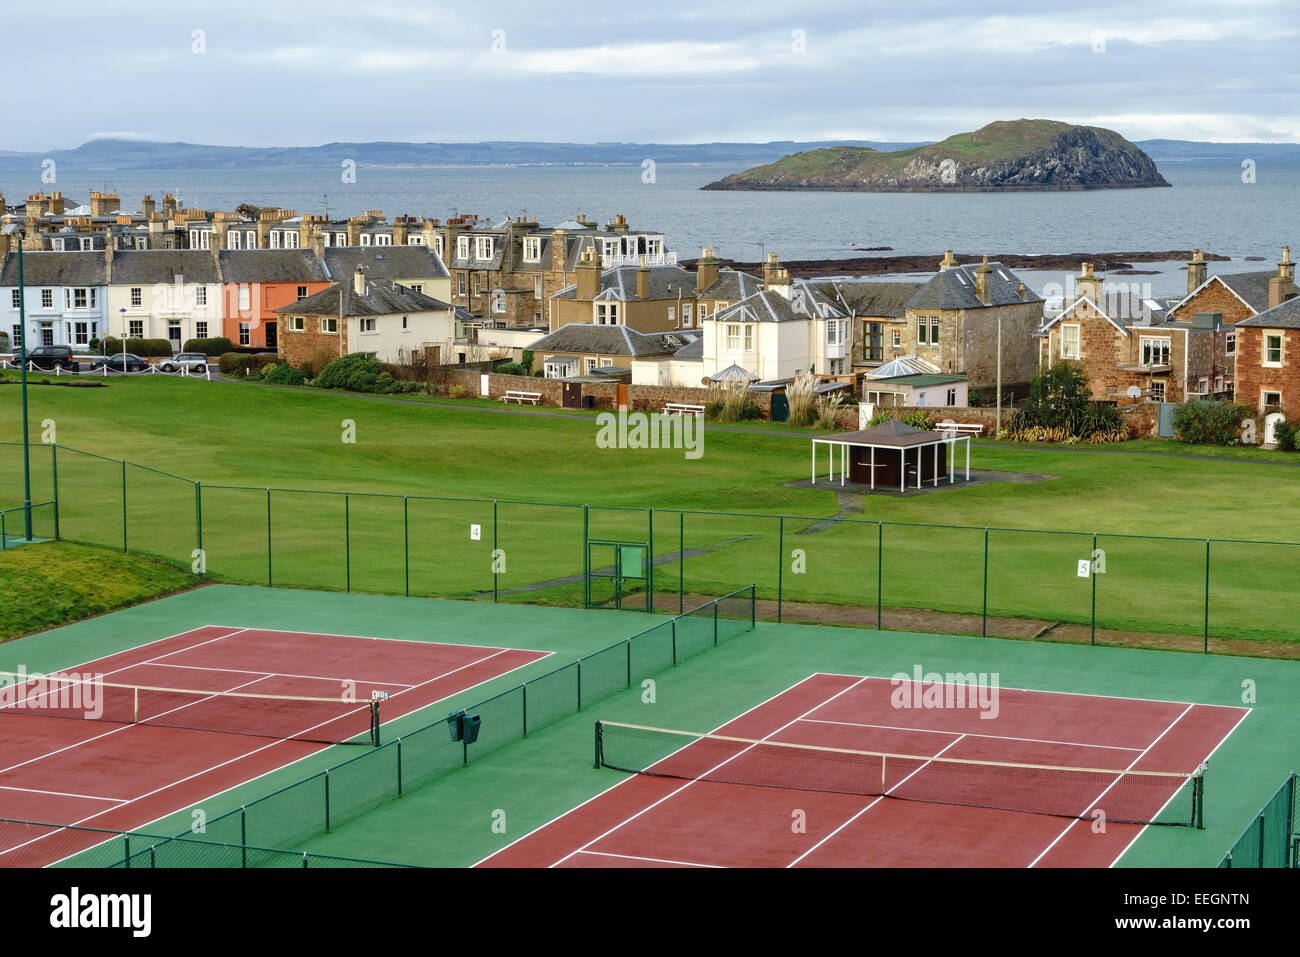 The outdoor tennis courts at North Berwick, looking out to sea. East Lothian, Scotland. Stock Photo